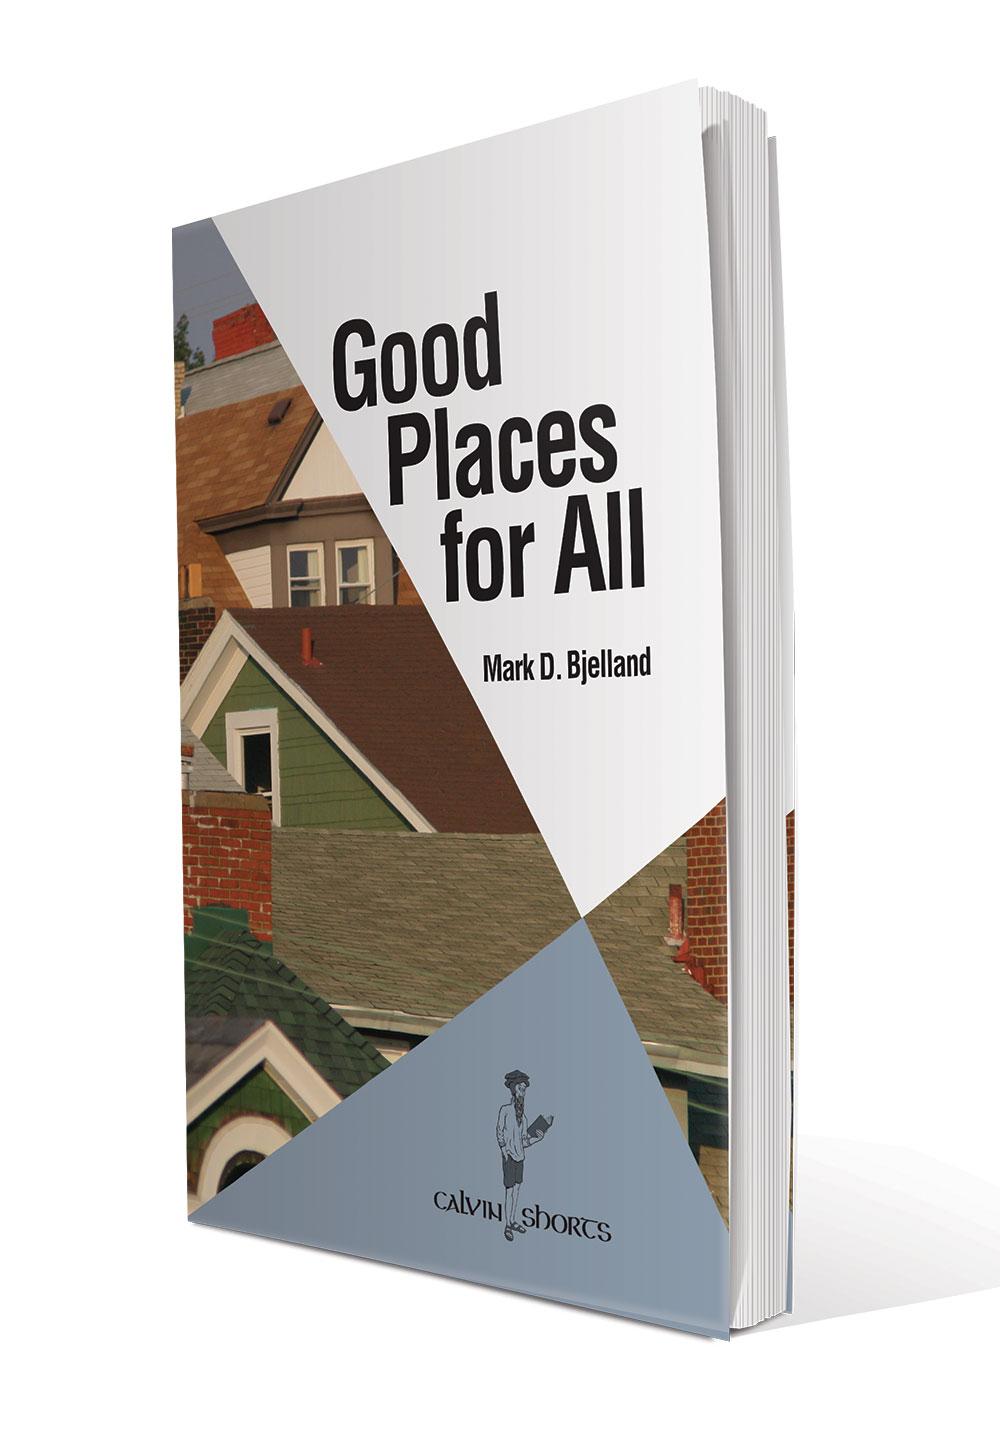 This book, by Mark Bjelland, is available from online retailers or the Calvin Campus Store.